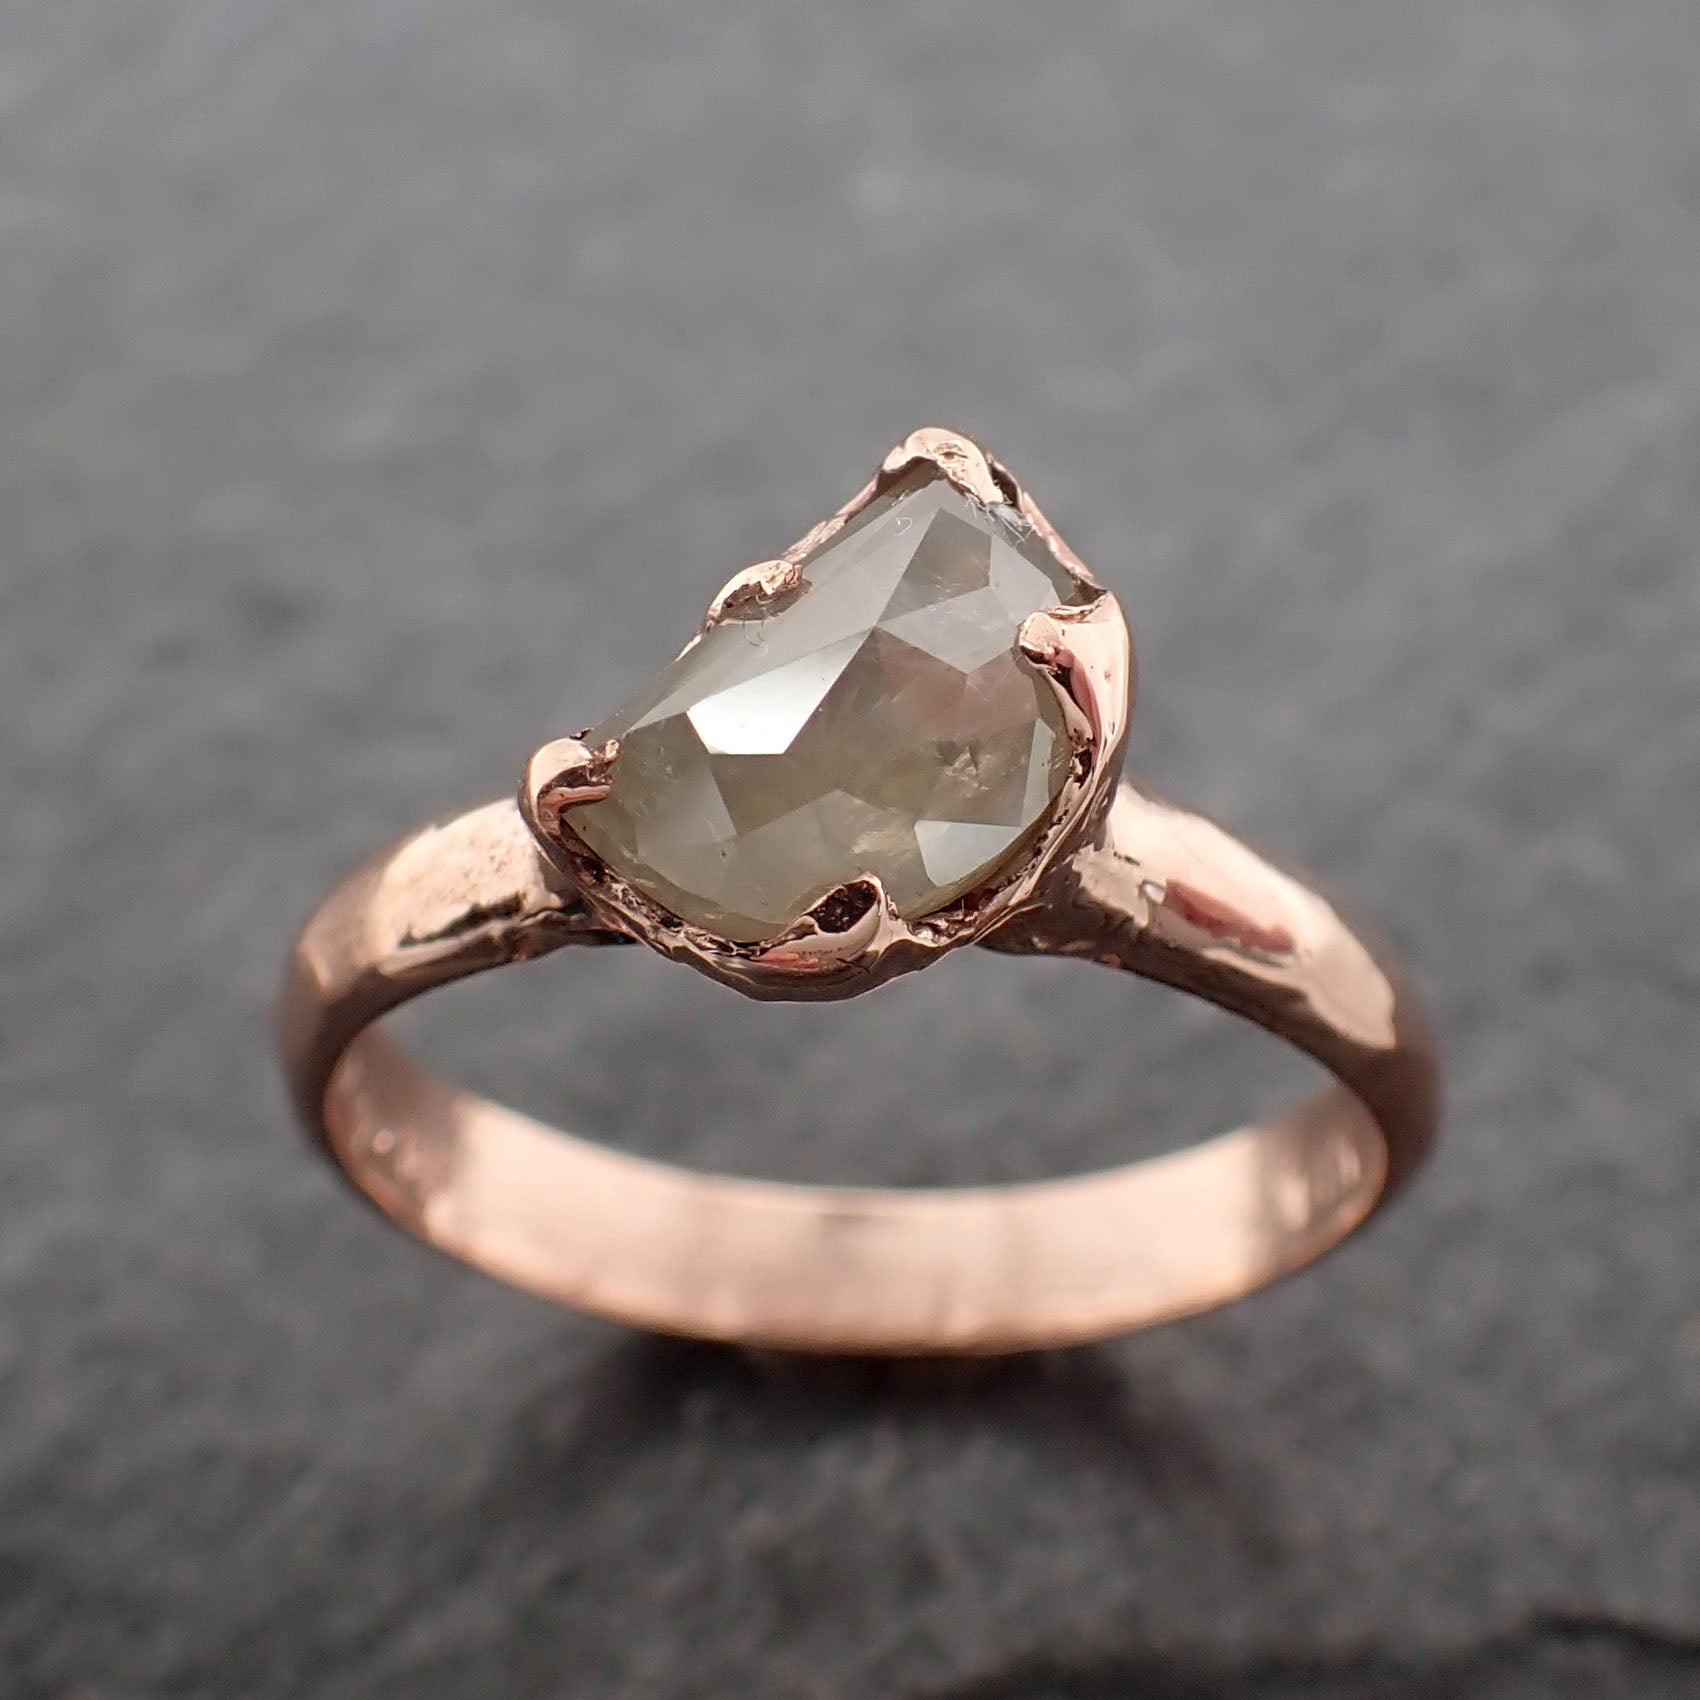 Faceted Fancy cut white and gold Half Moon Diamond Engagement 14k Rose Gold Solitaire Wedding Ring byAngeline 2469